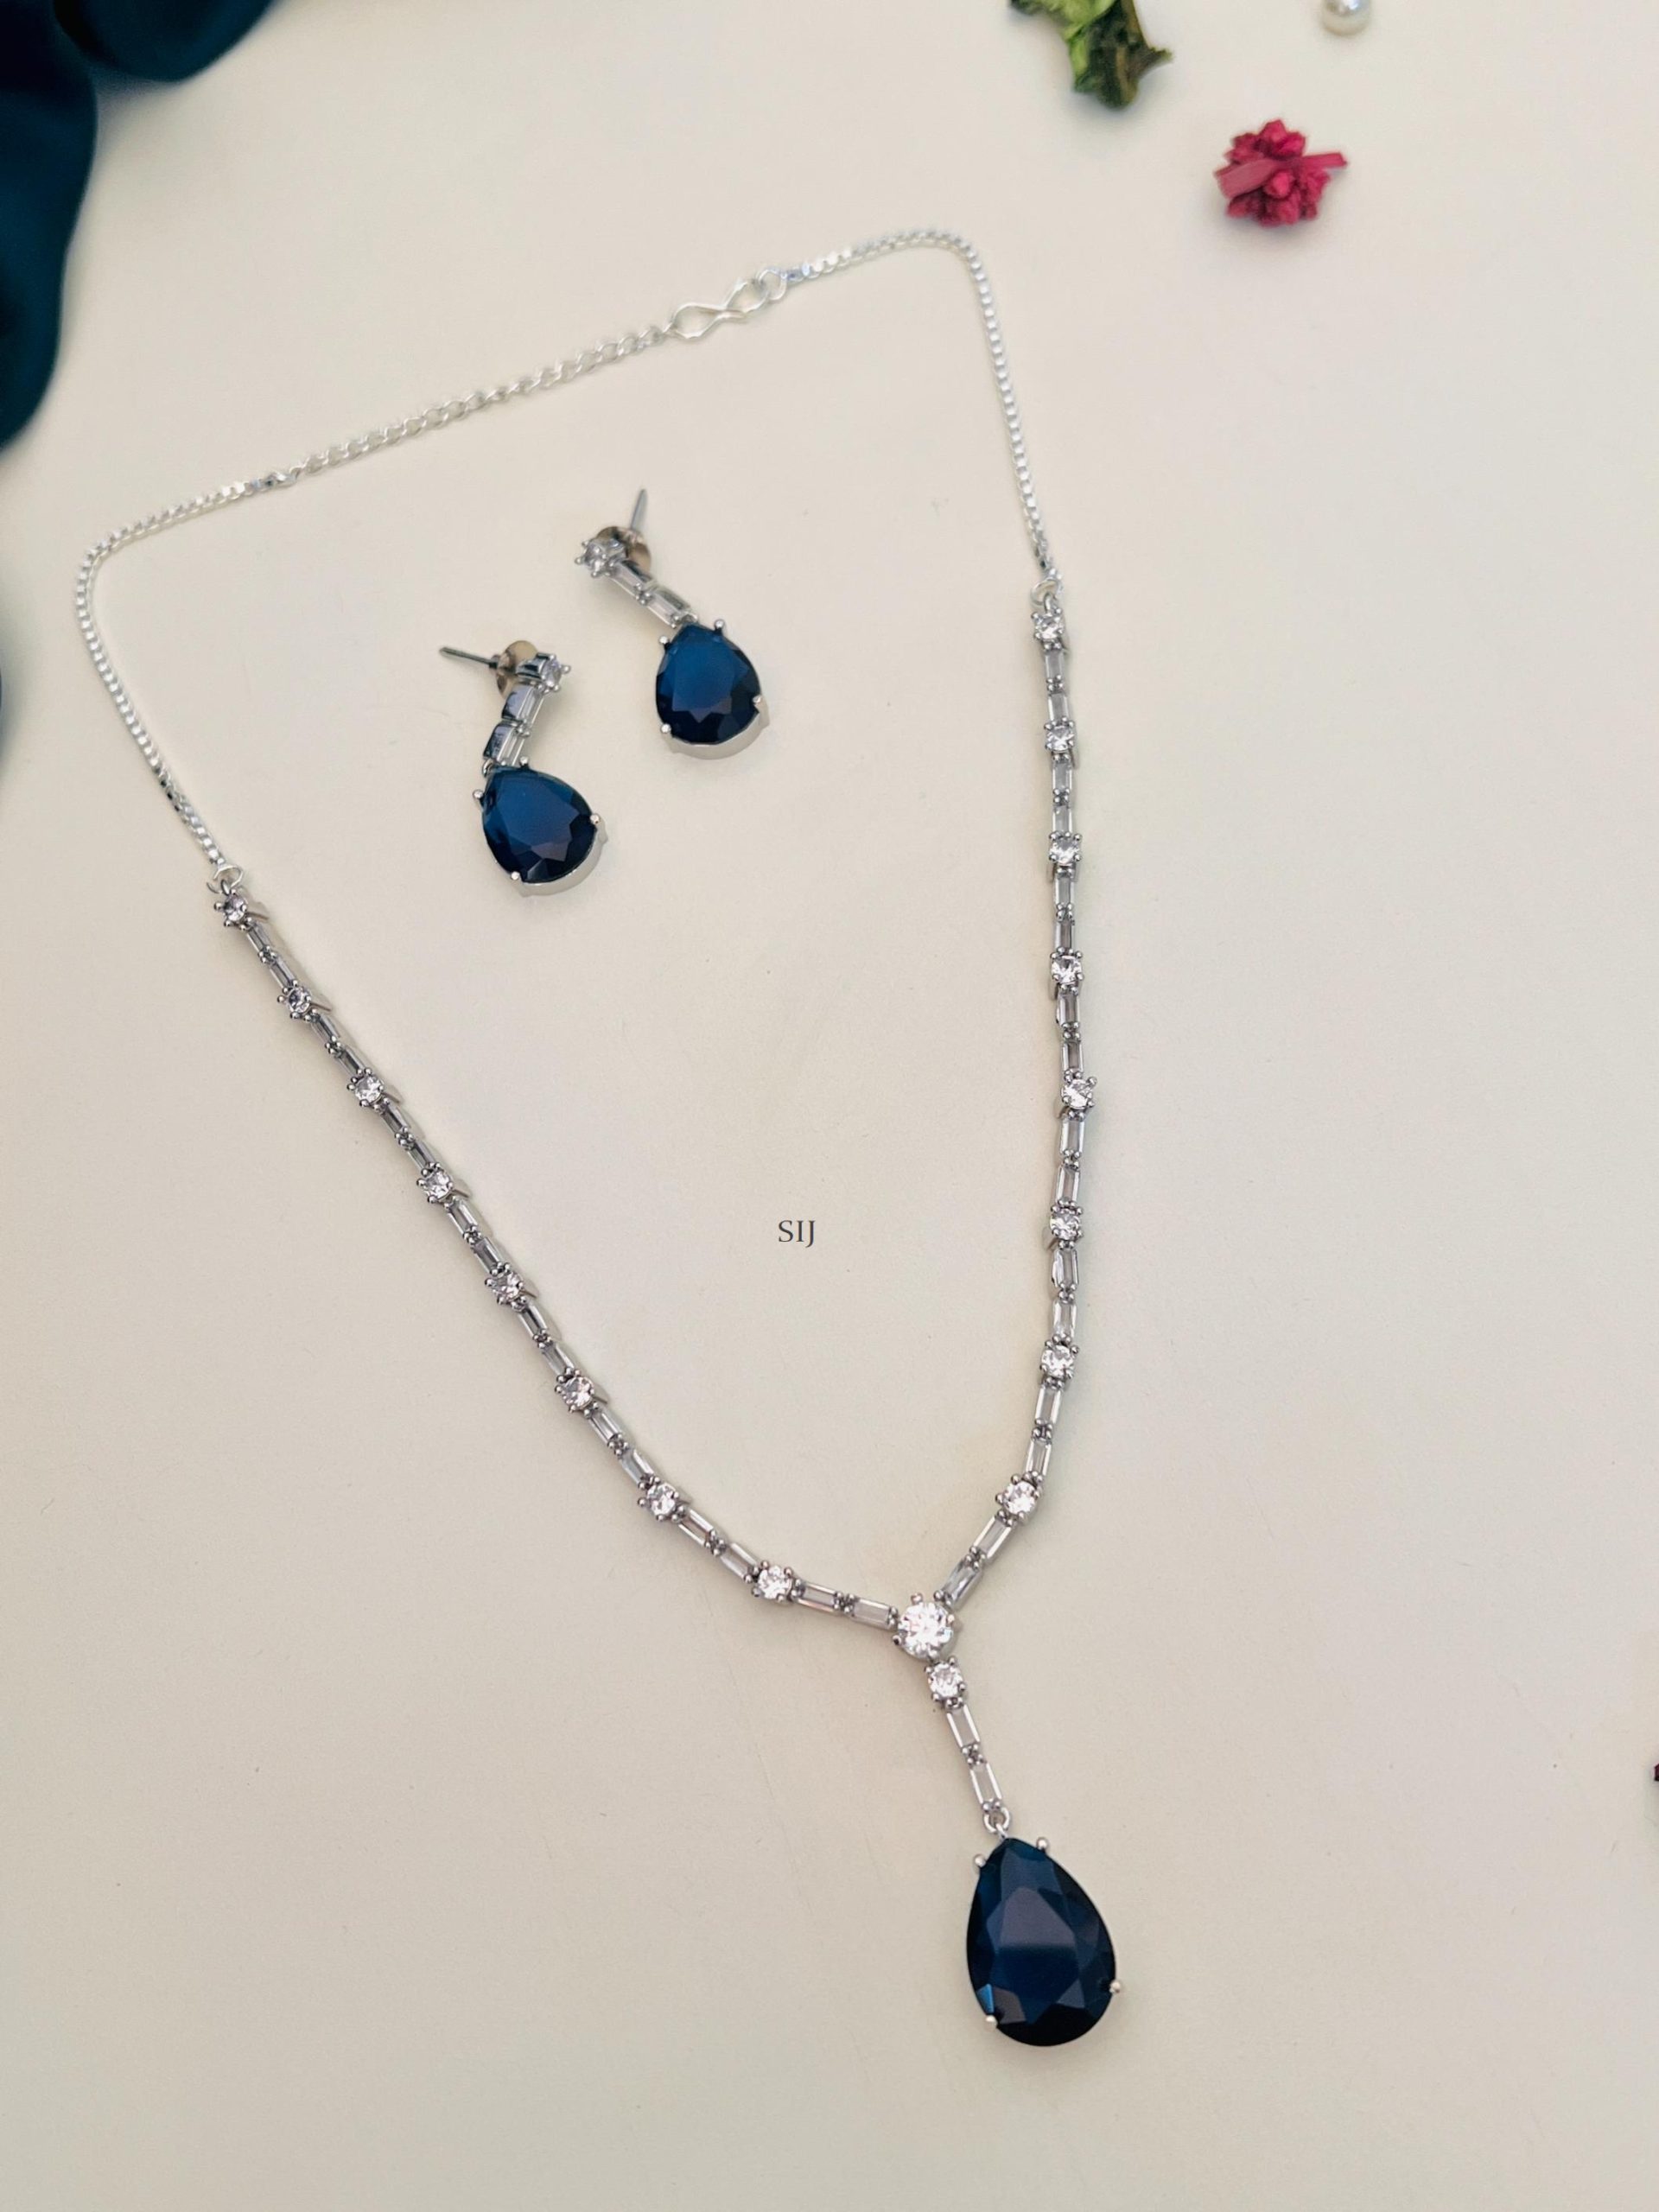 Silver Plated Single Line AD Stones Chain with Blue Stone Pendant